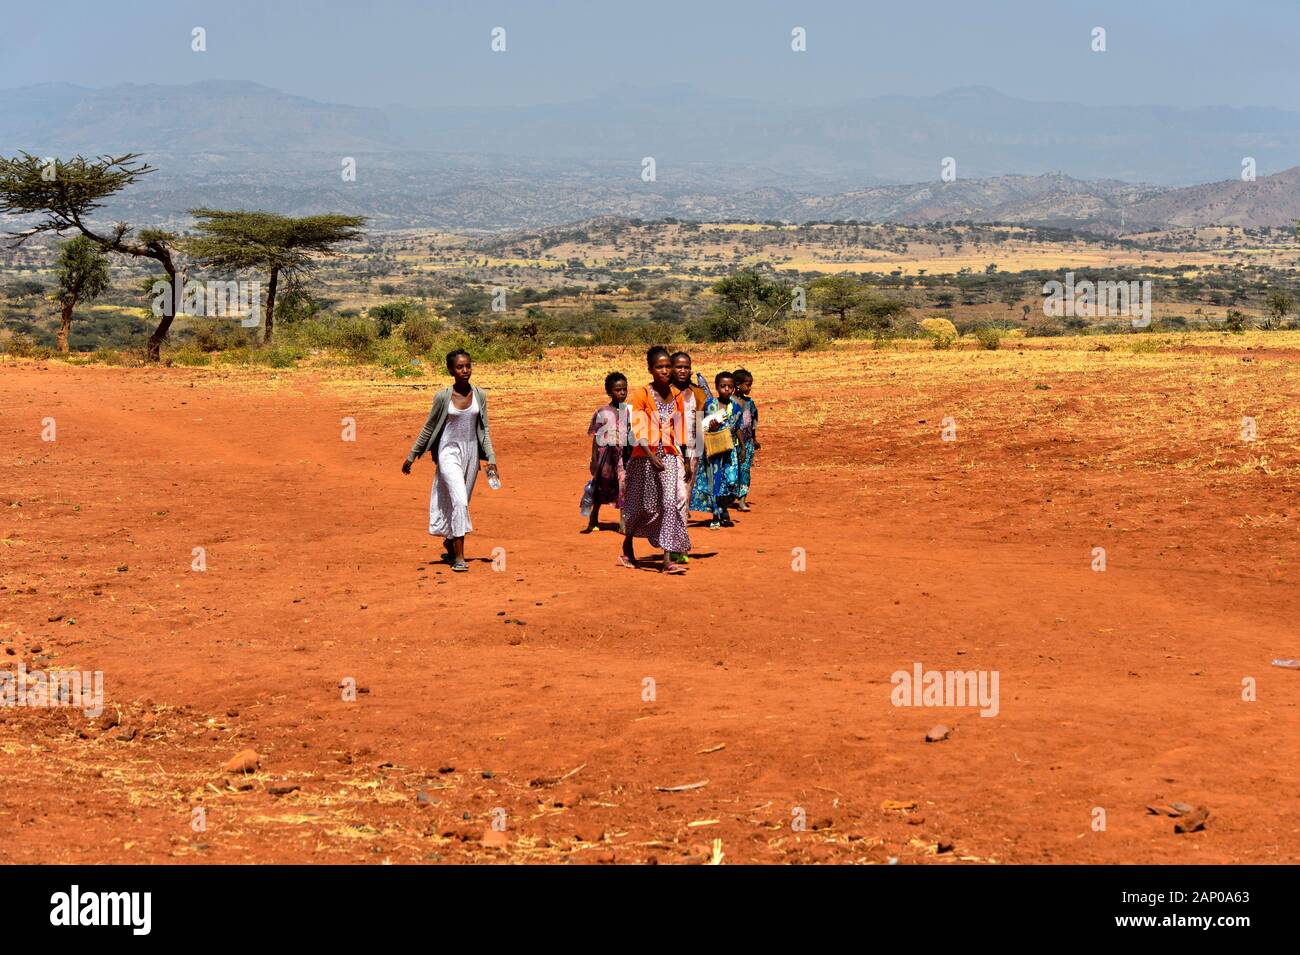 Group of young people walking across the rusty-red laterite soil of the Hawzien Plain near Hazwien, Gheralta region, Tigray, Ethiopia Stock Photo